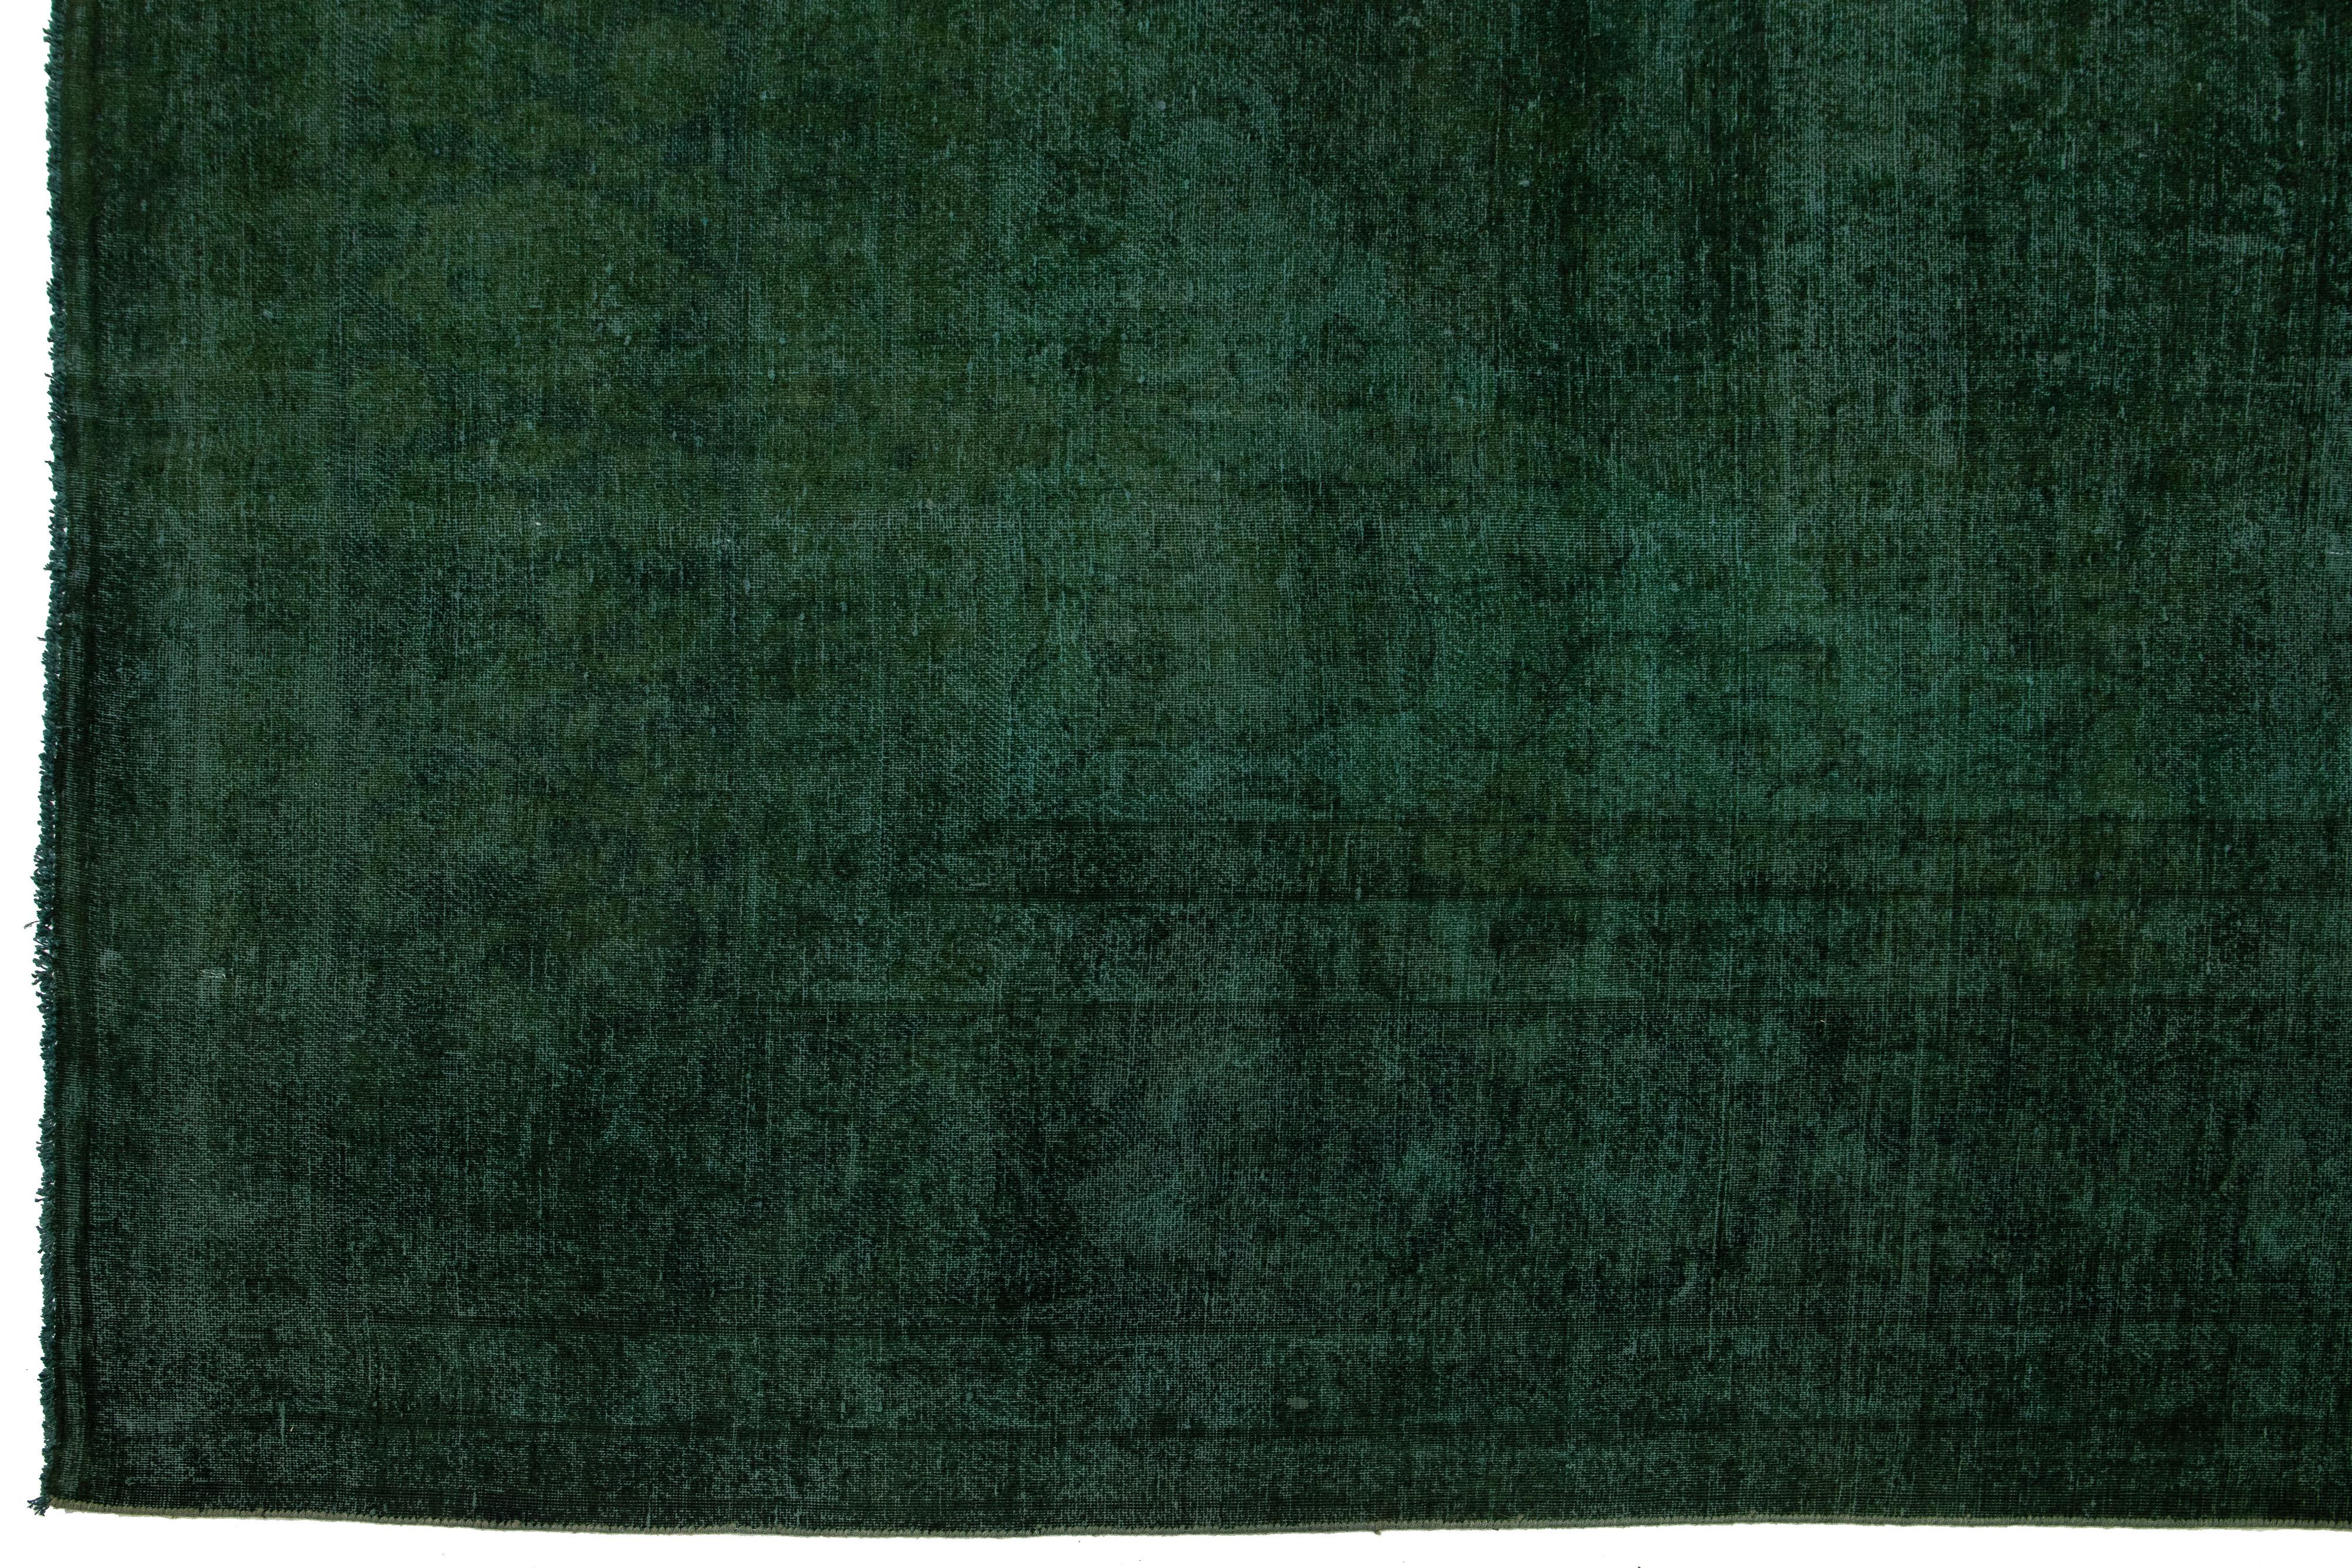  Handmade 1930s Overdyed Persian Designed Wool Rug Oversize In Green For Sale 2